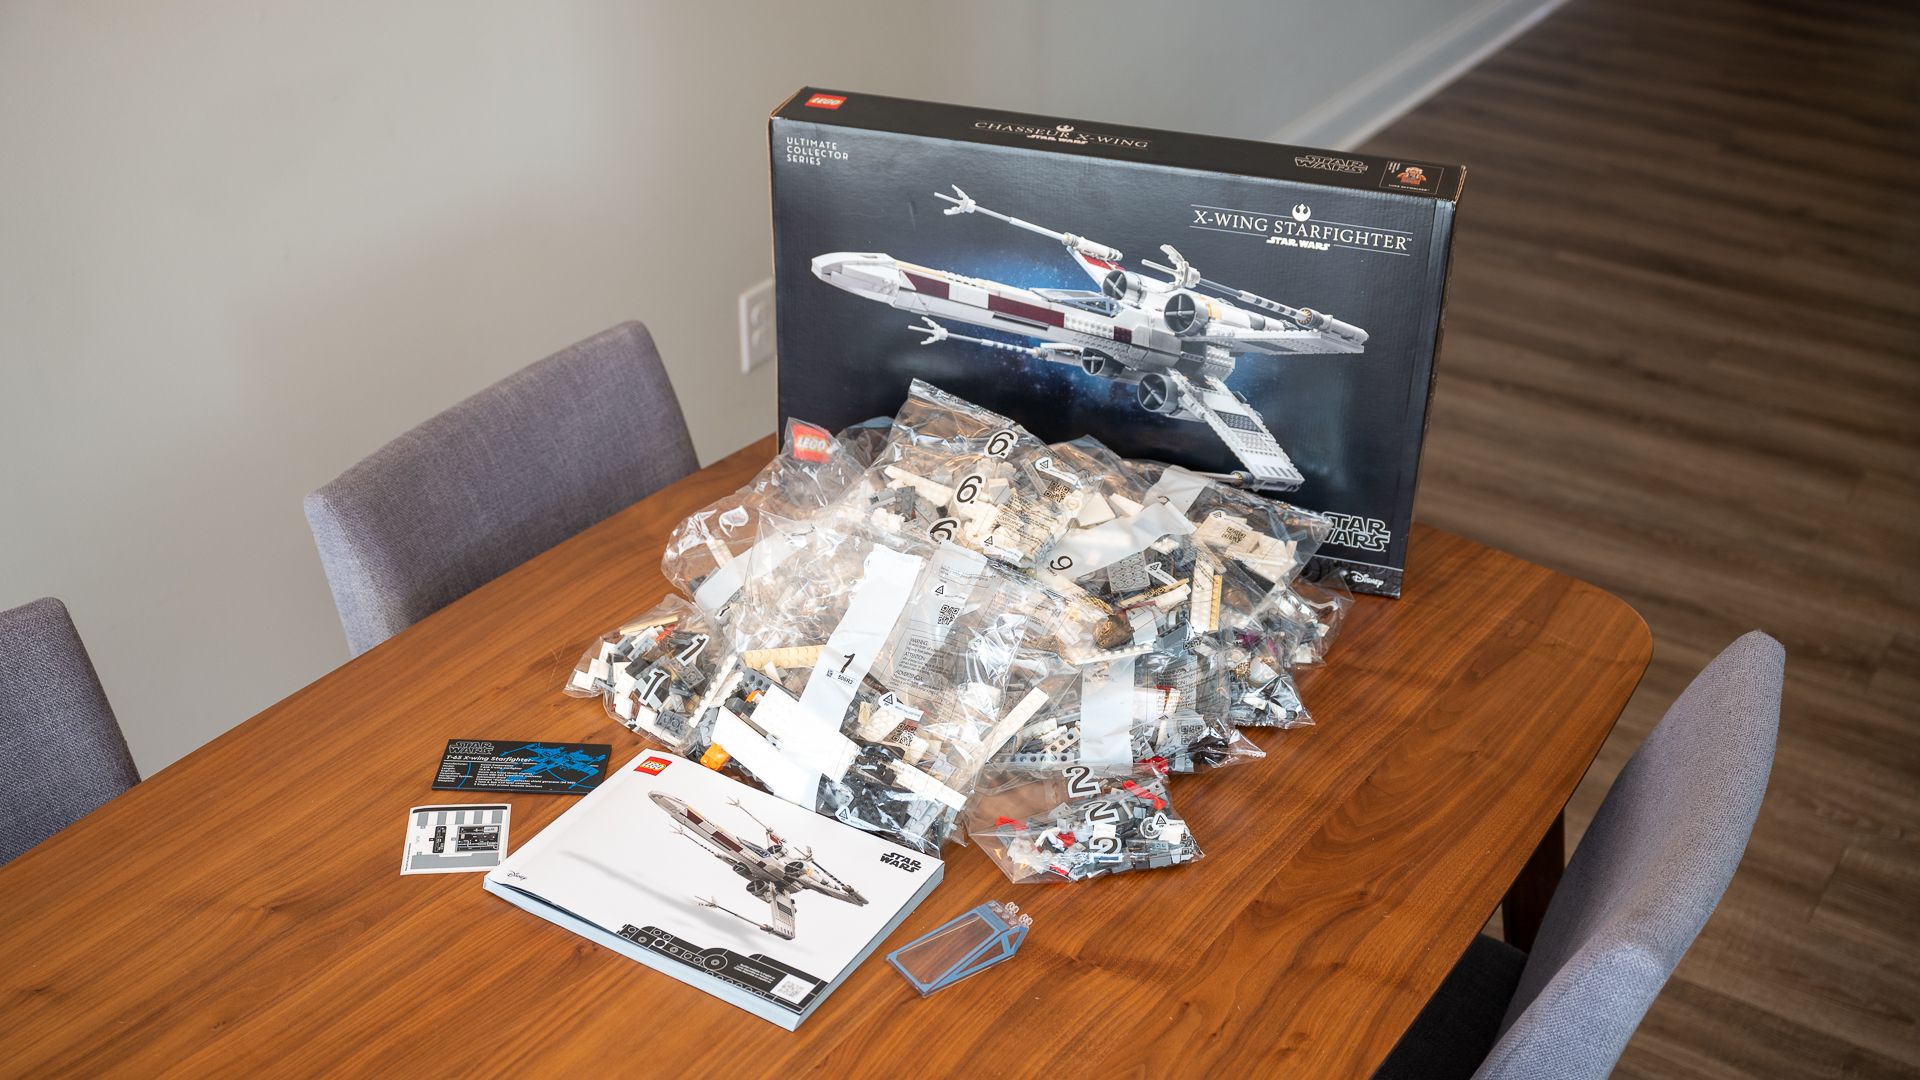 All of the contents of the LEGO Star Wars UCS X-Wing Starfighter box layed out on a table